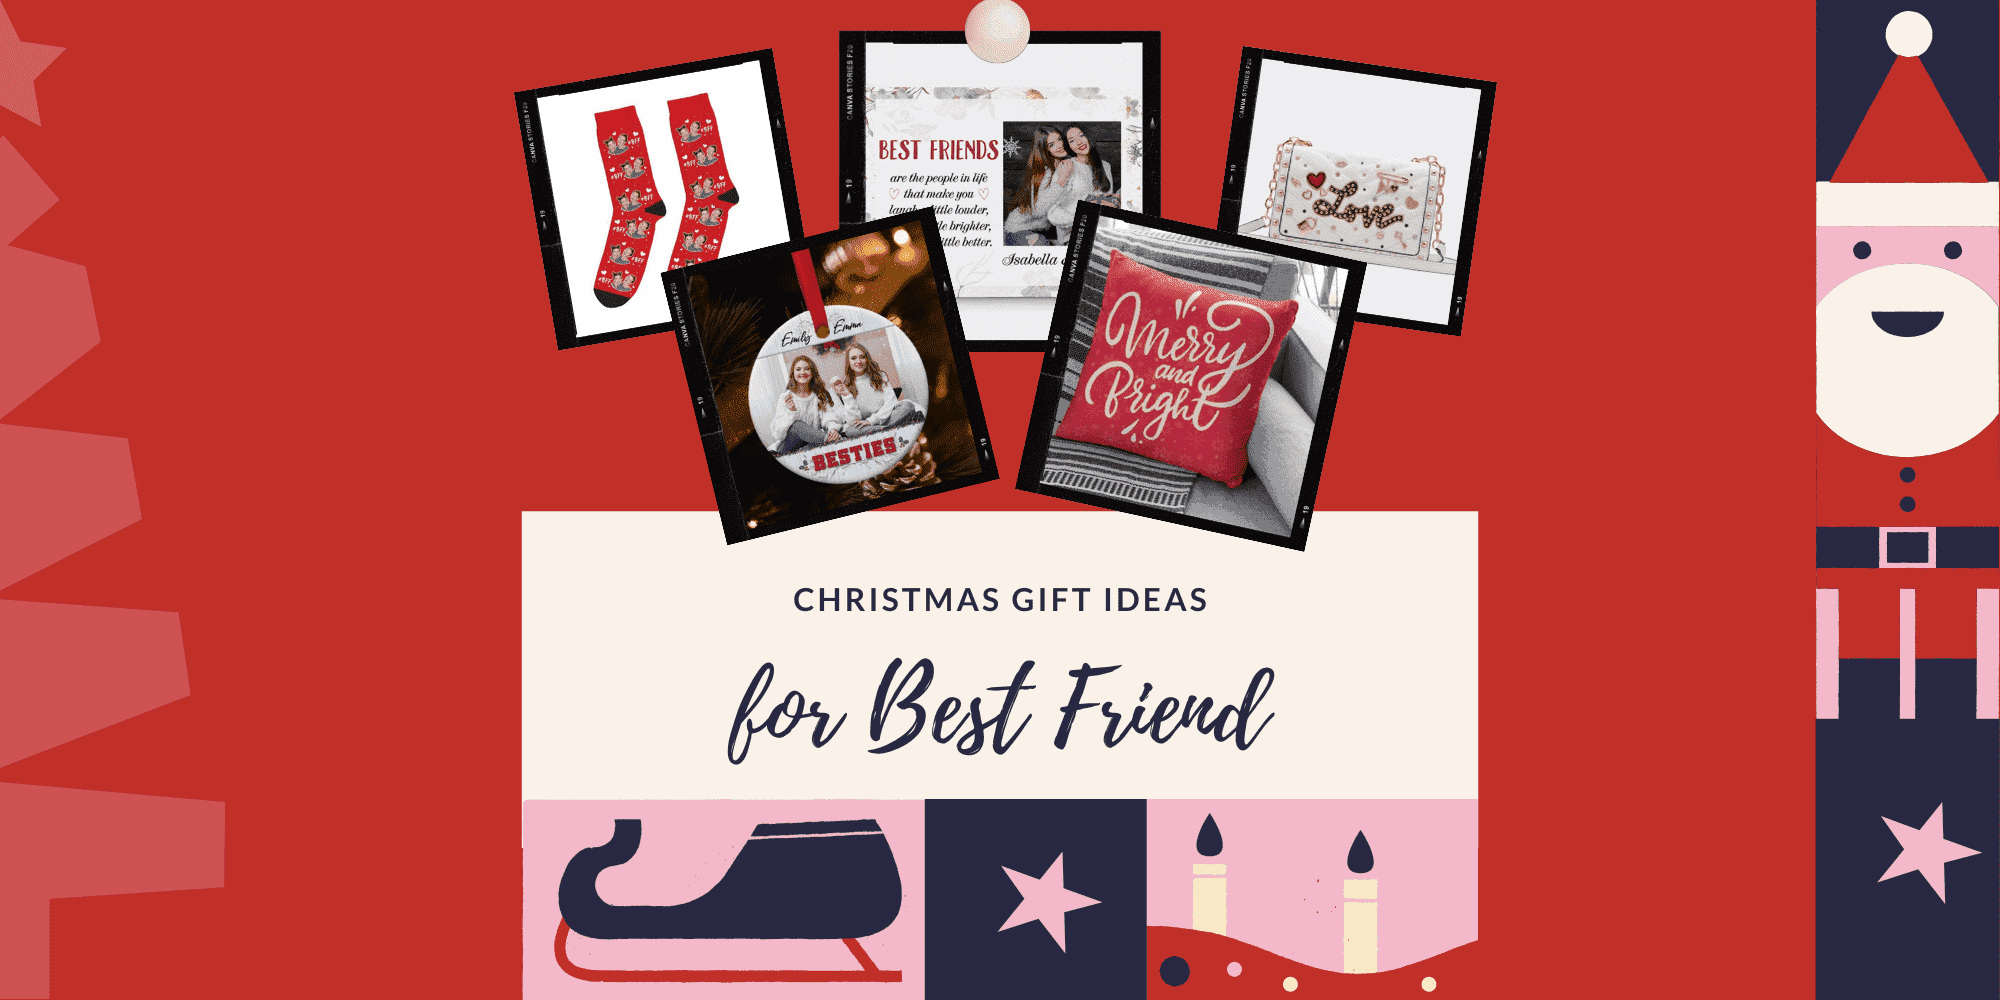 39 Awesome Christmas Gift Ideas for Your Best Friend in 2022